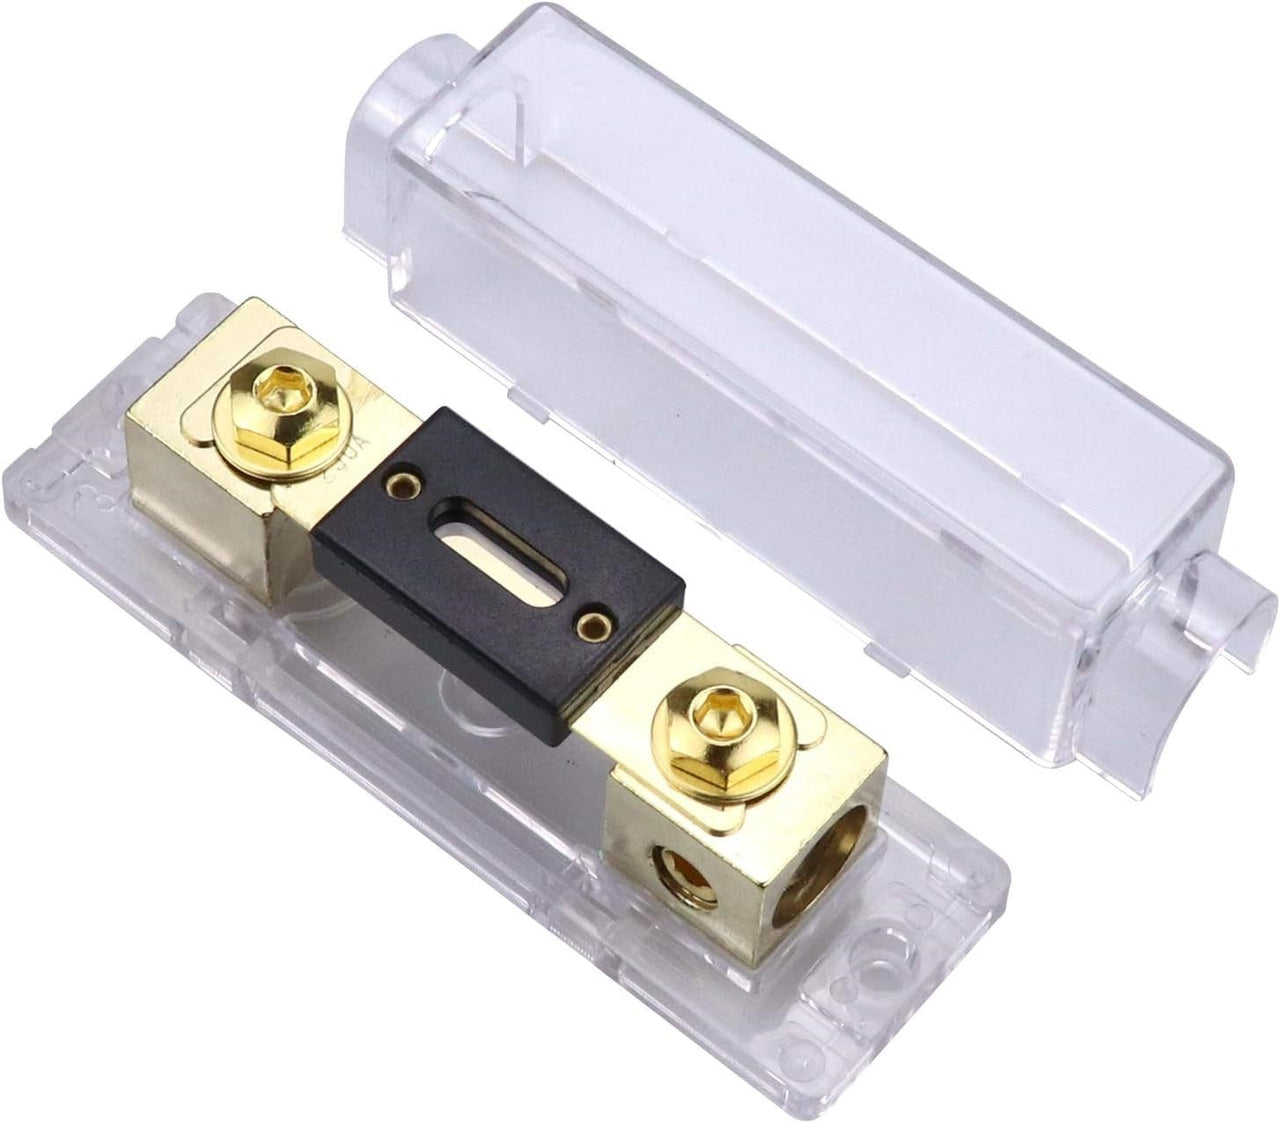 2 Absolute ANH-3 0/2/4 Gauge AWG in-Line ANL Fuse Holder & 2 Gold Plated 60 Amp Fuse